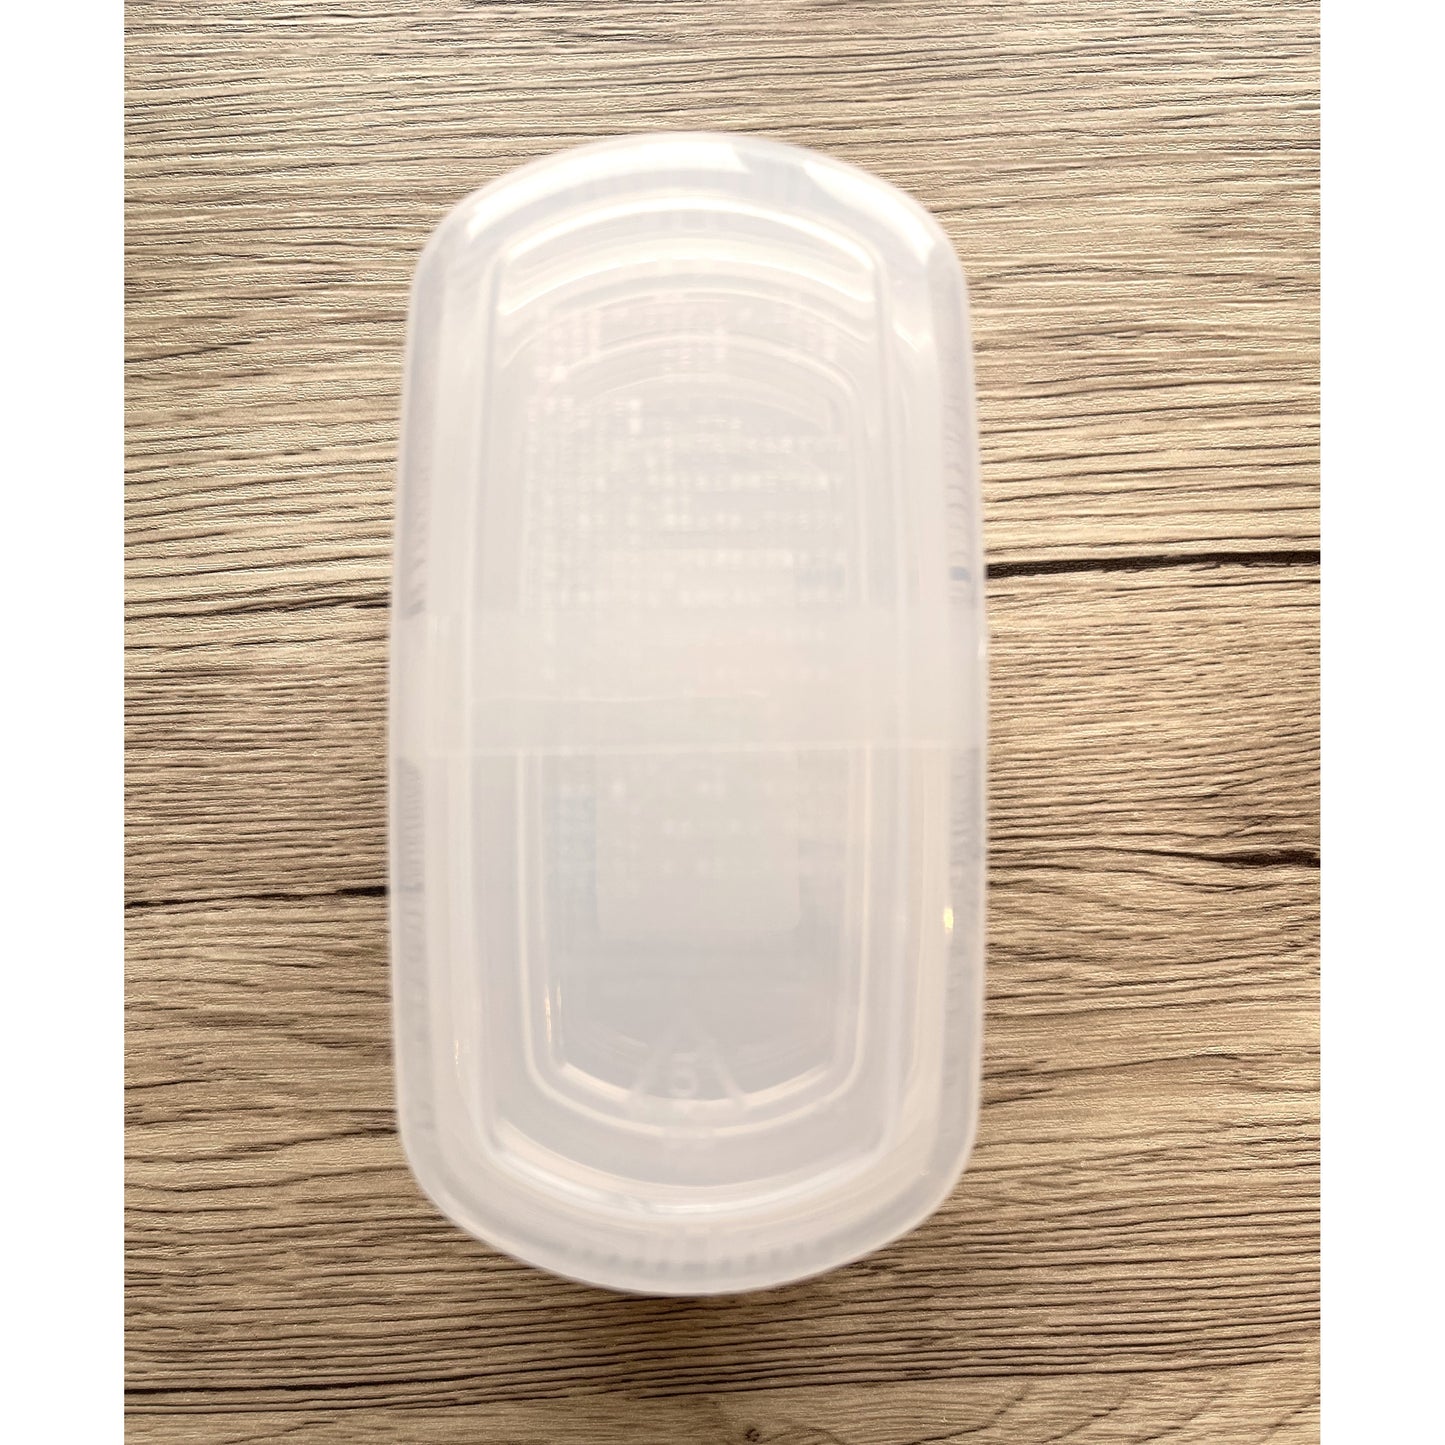 Storage Containers 300ml x 2 (Made in Japan)